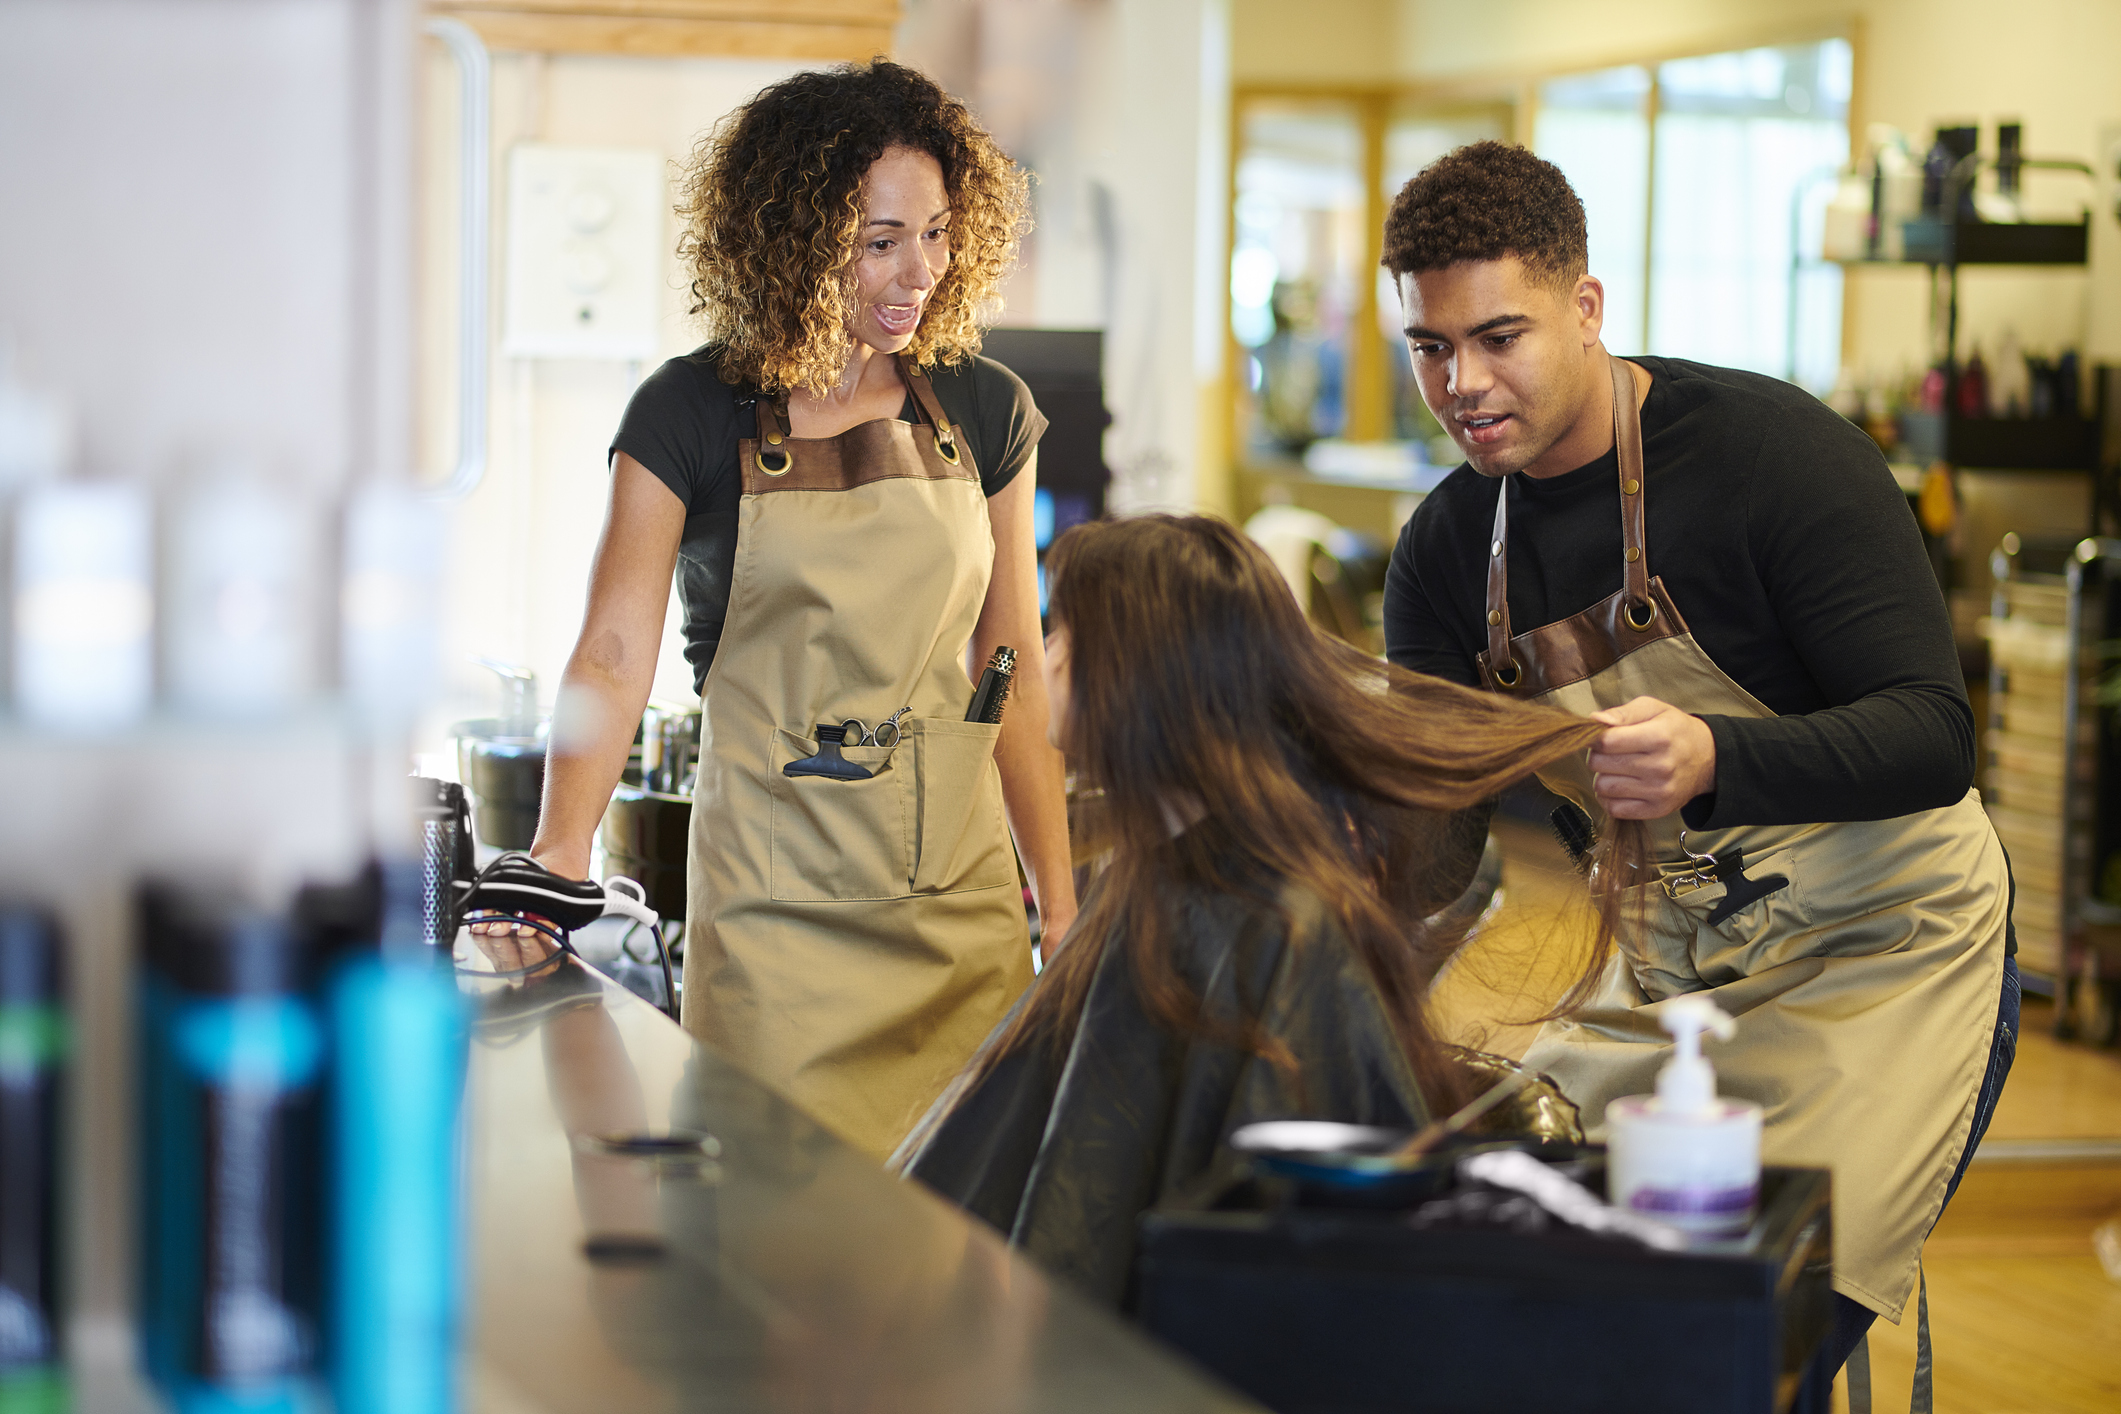 The Salon Owner’s Guide to Hiring & Staff Retention